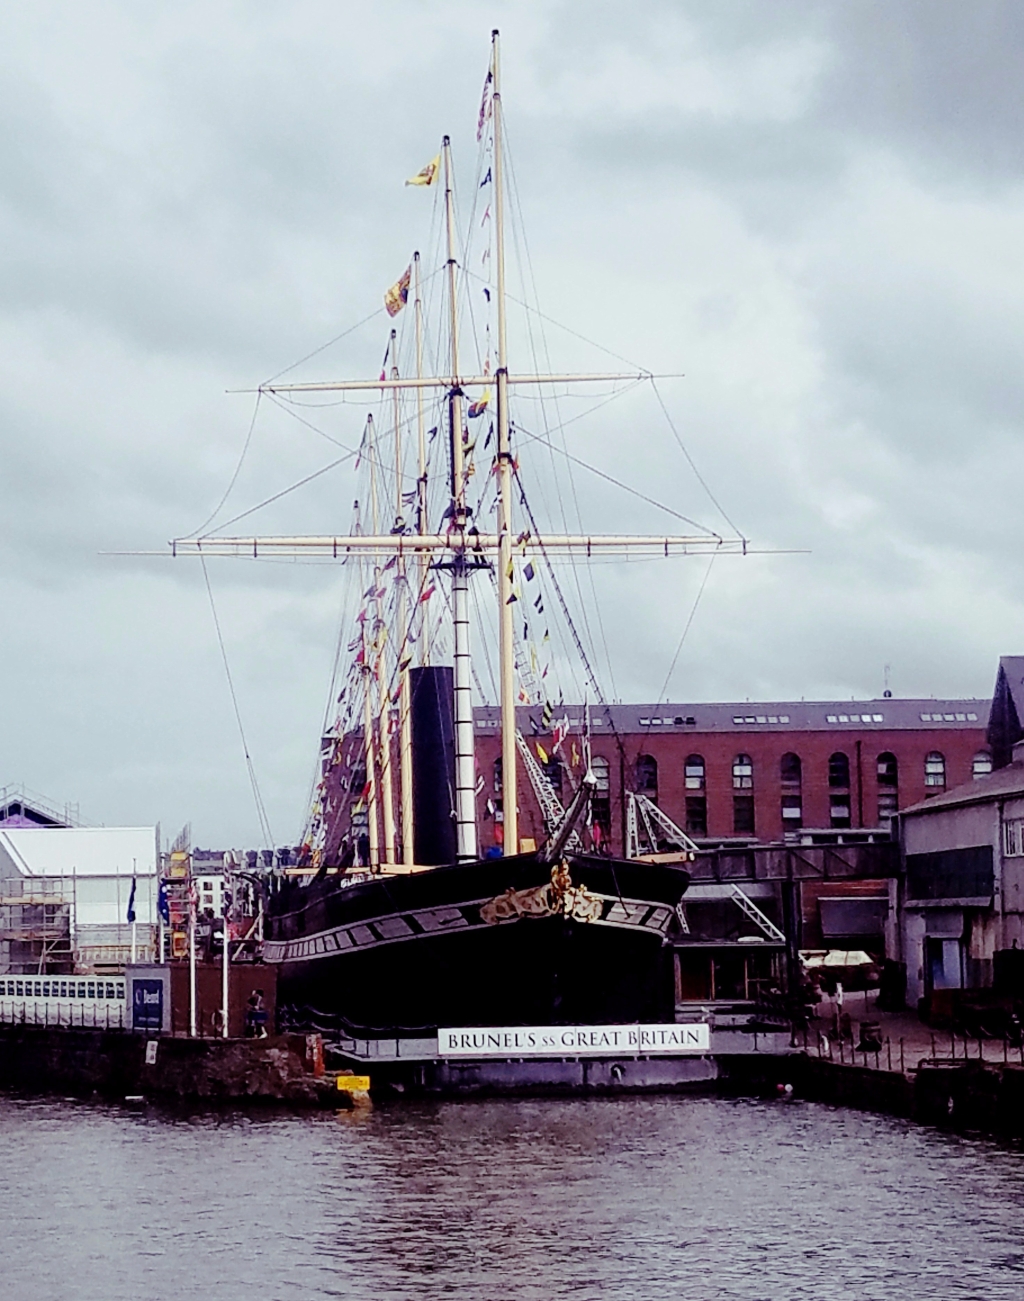 Brunel’s ss Great Britain